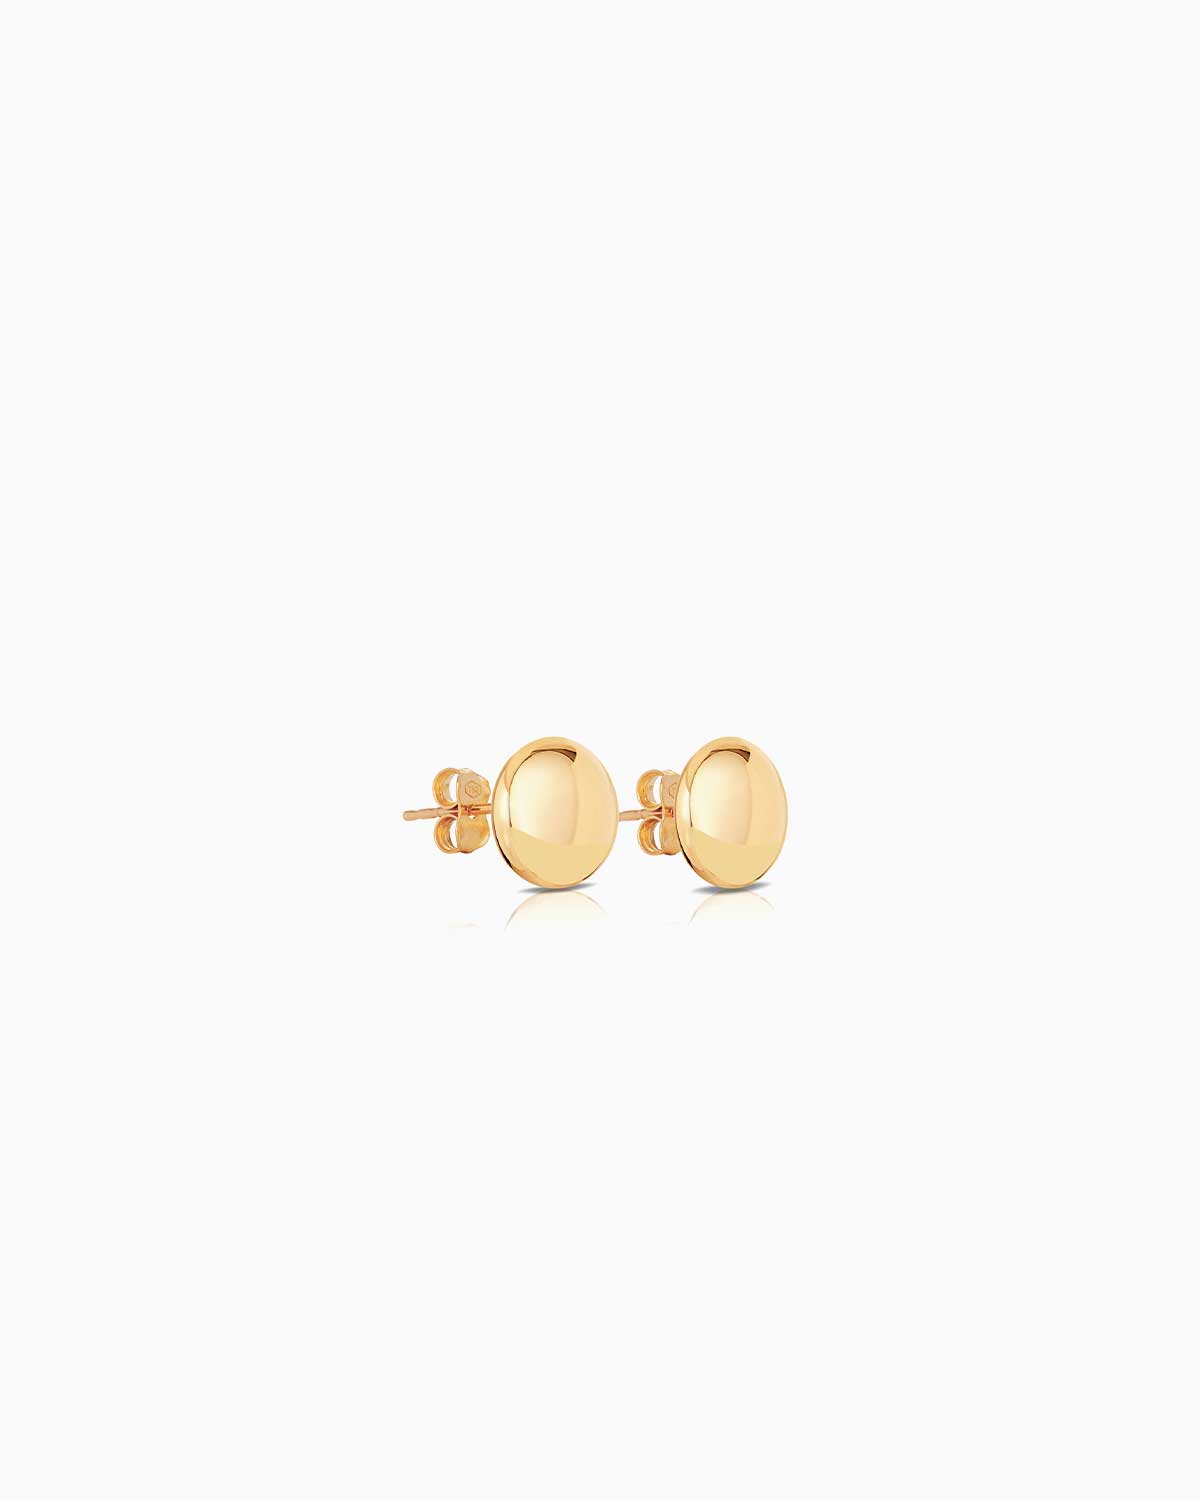 Claude by Claudia 18 karat yellow gold button studs with butterfly backs.